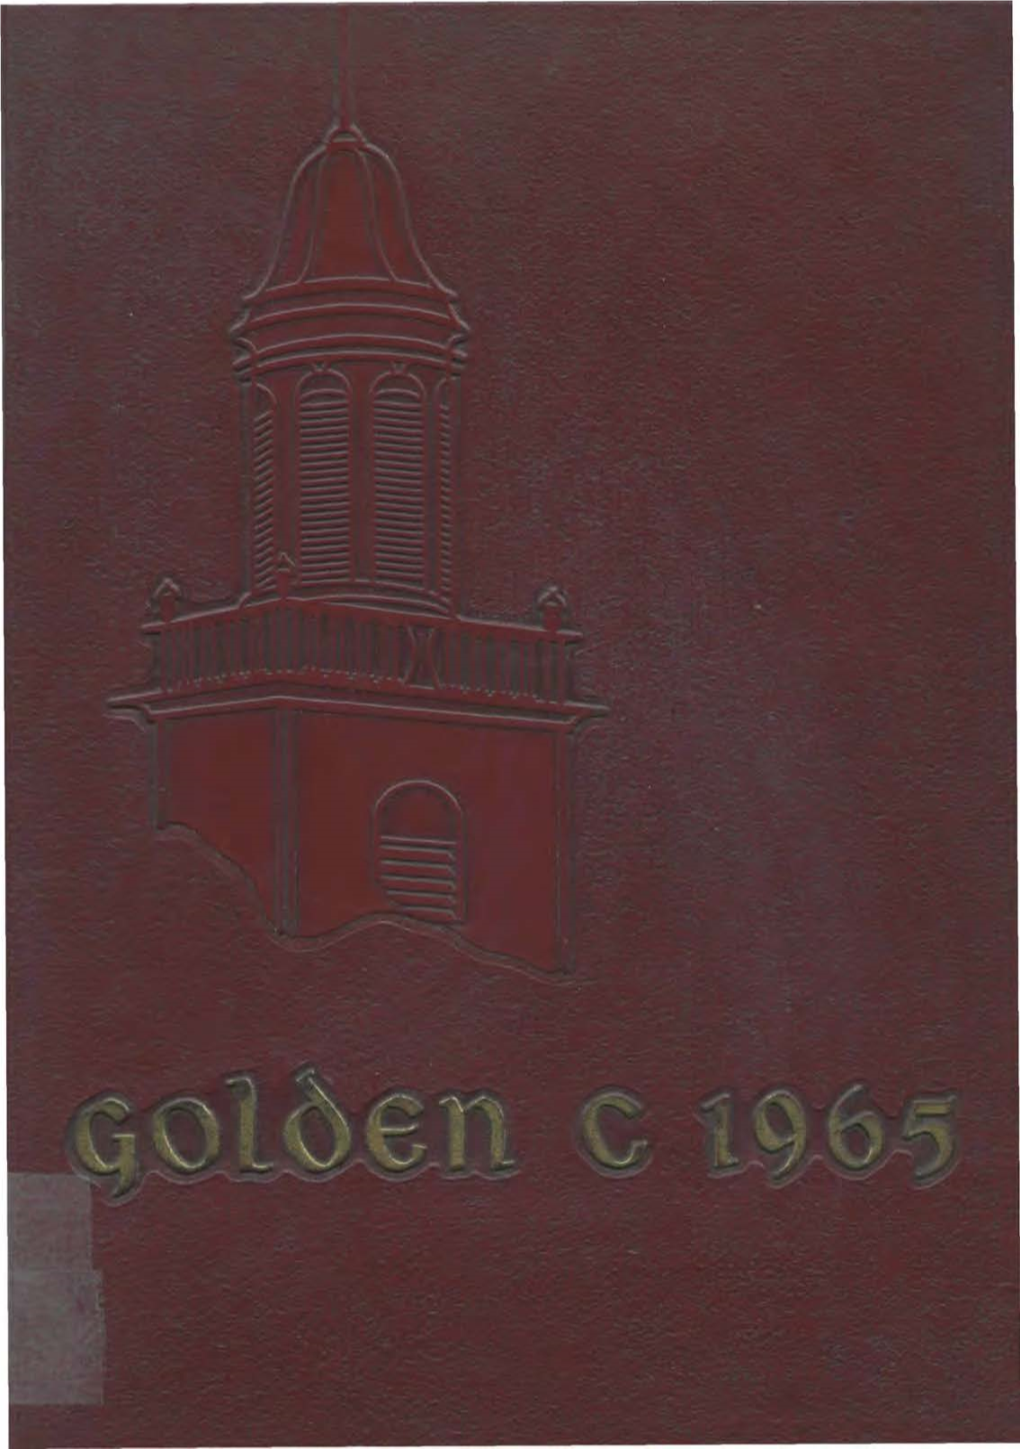 1965 "Golden C" Ends with Graduation; Yet Actually It Will Continue Moving Forward with the Futures of the People Pictured With- in